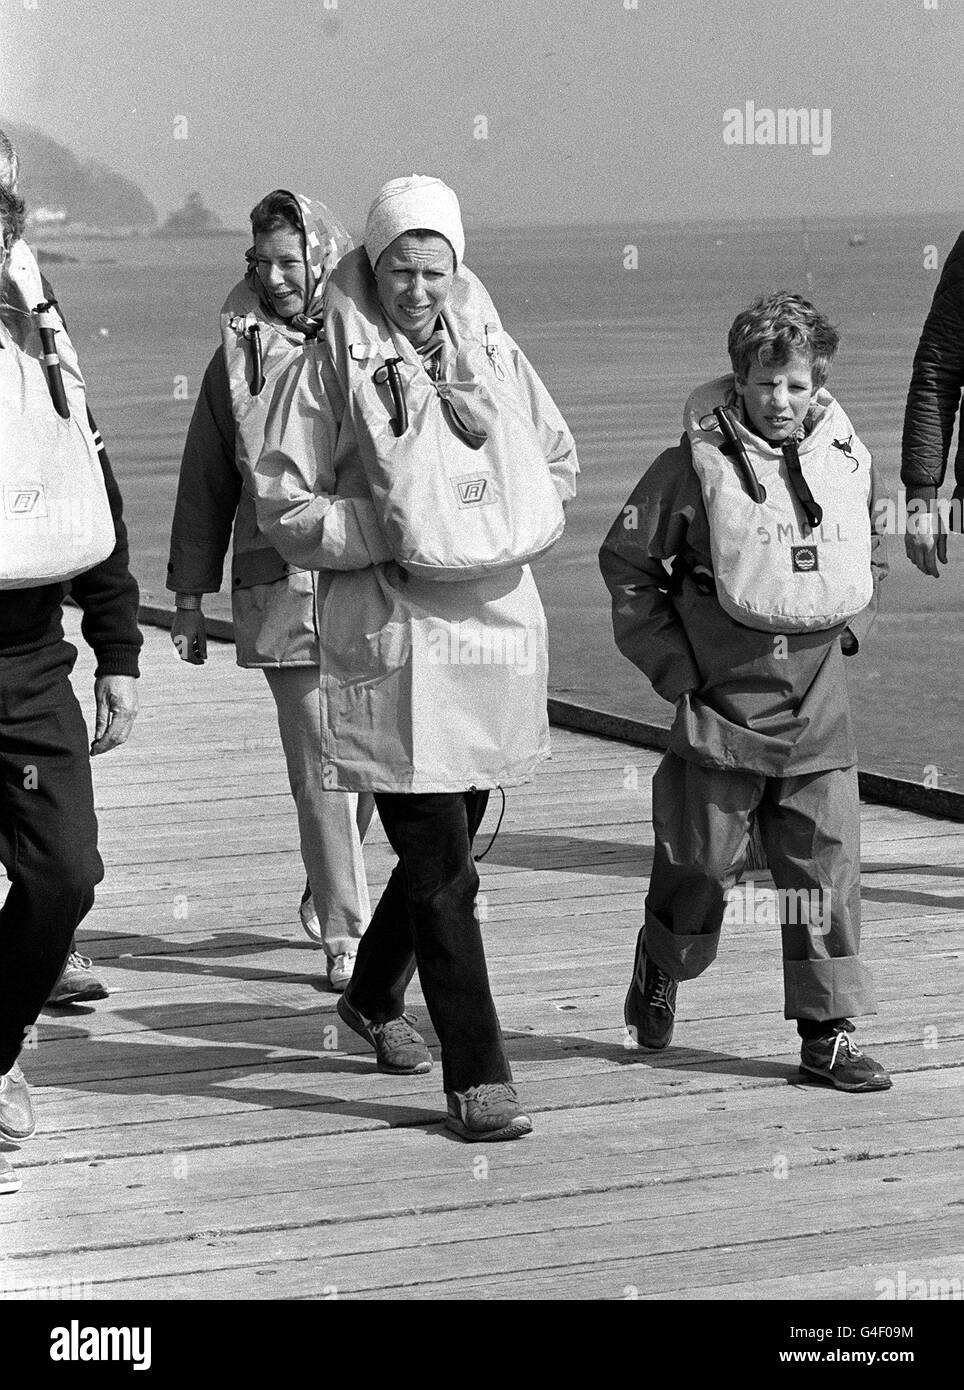 PA NEWS PHOTO 6/4/88 THE PRINCESS ROYAL WITH SON PETER PHILLIPS WALKING ON THE WHARF AT ABERDOVEY, NORTH WALES DURING A VISIT TO AN OUTWARD BOUND CENTRE Stock Photo